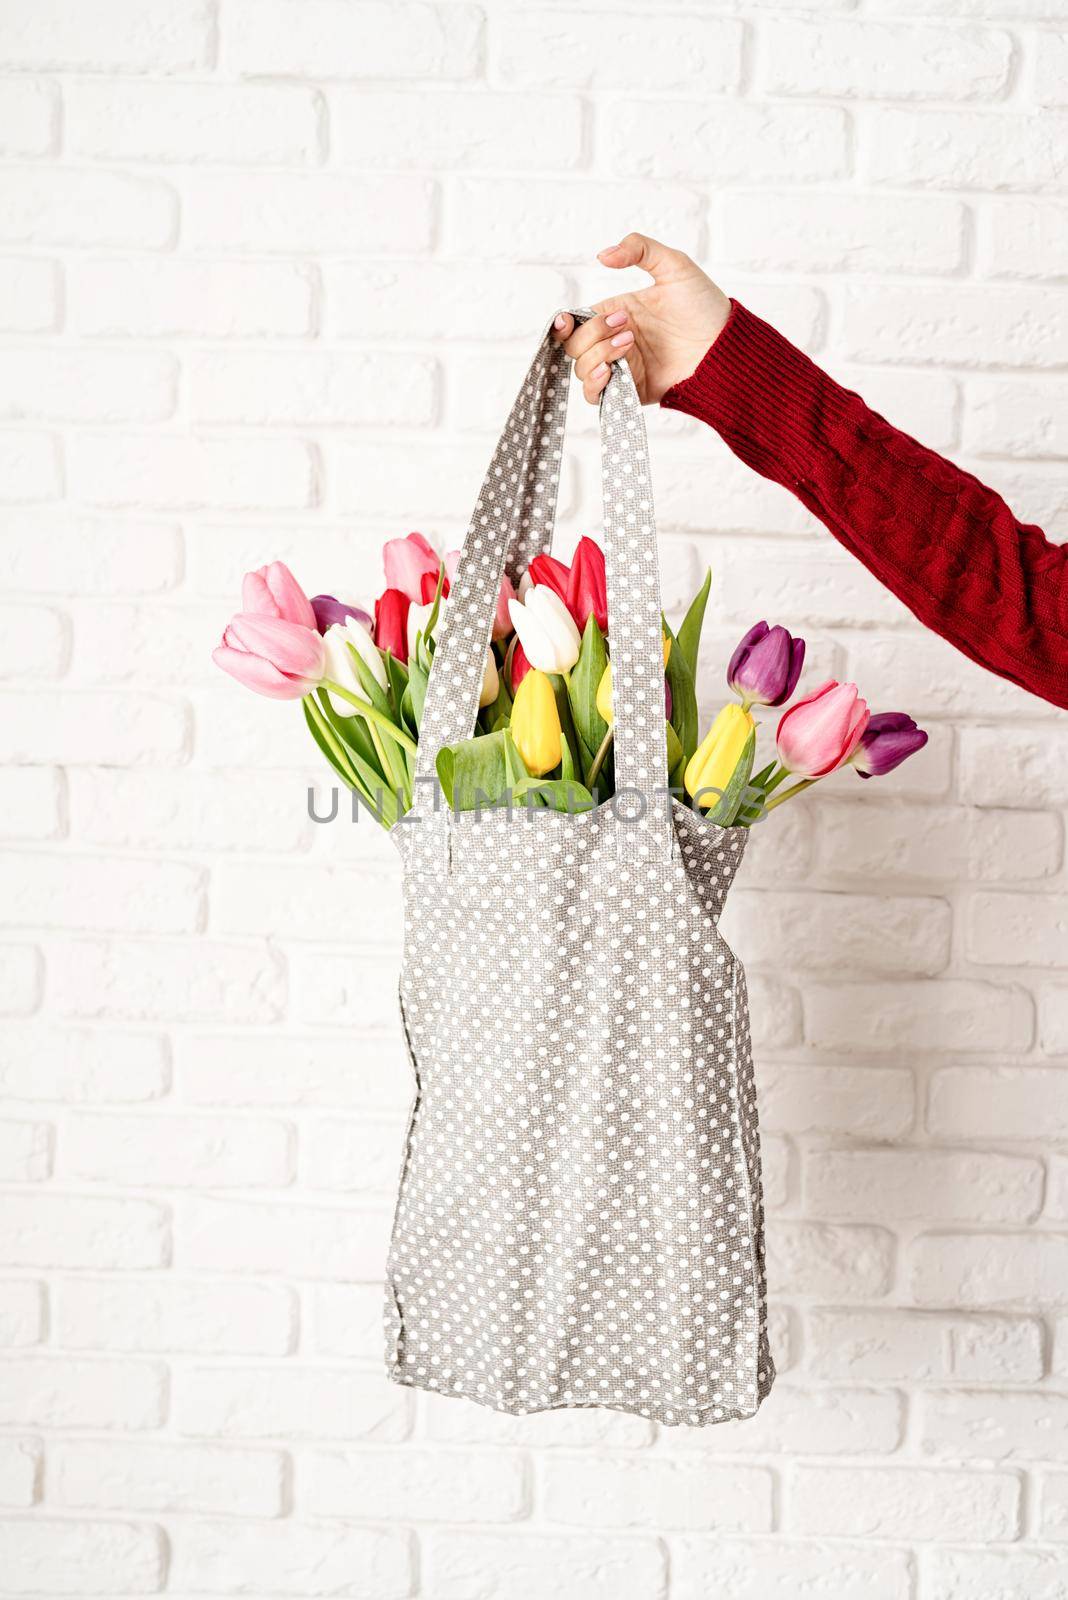 Eco friendly, zero waste concept. Spring shopping. Woman hand holding gray polka dot fabric bag with colorful tulips